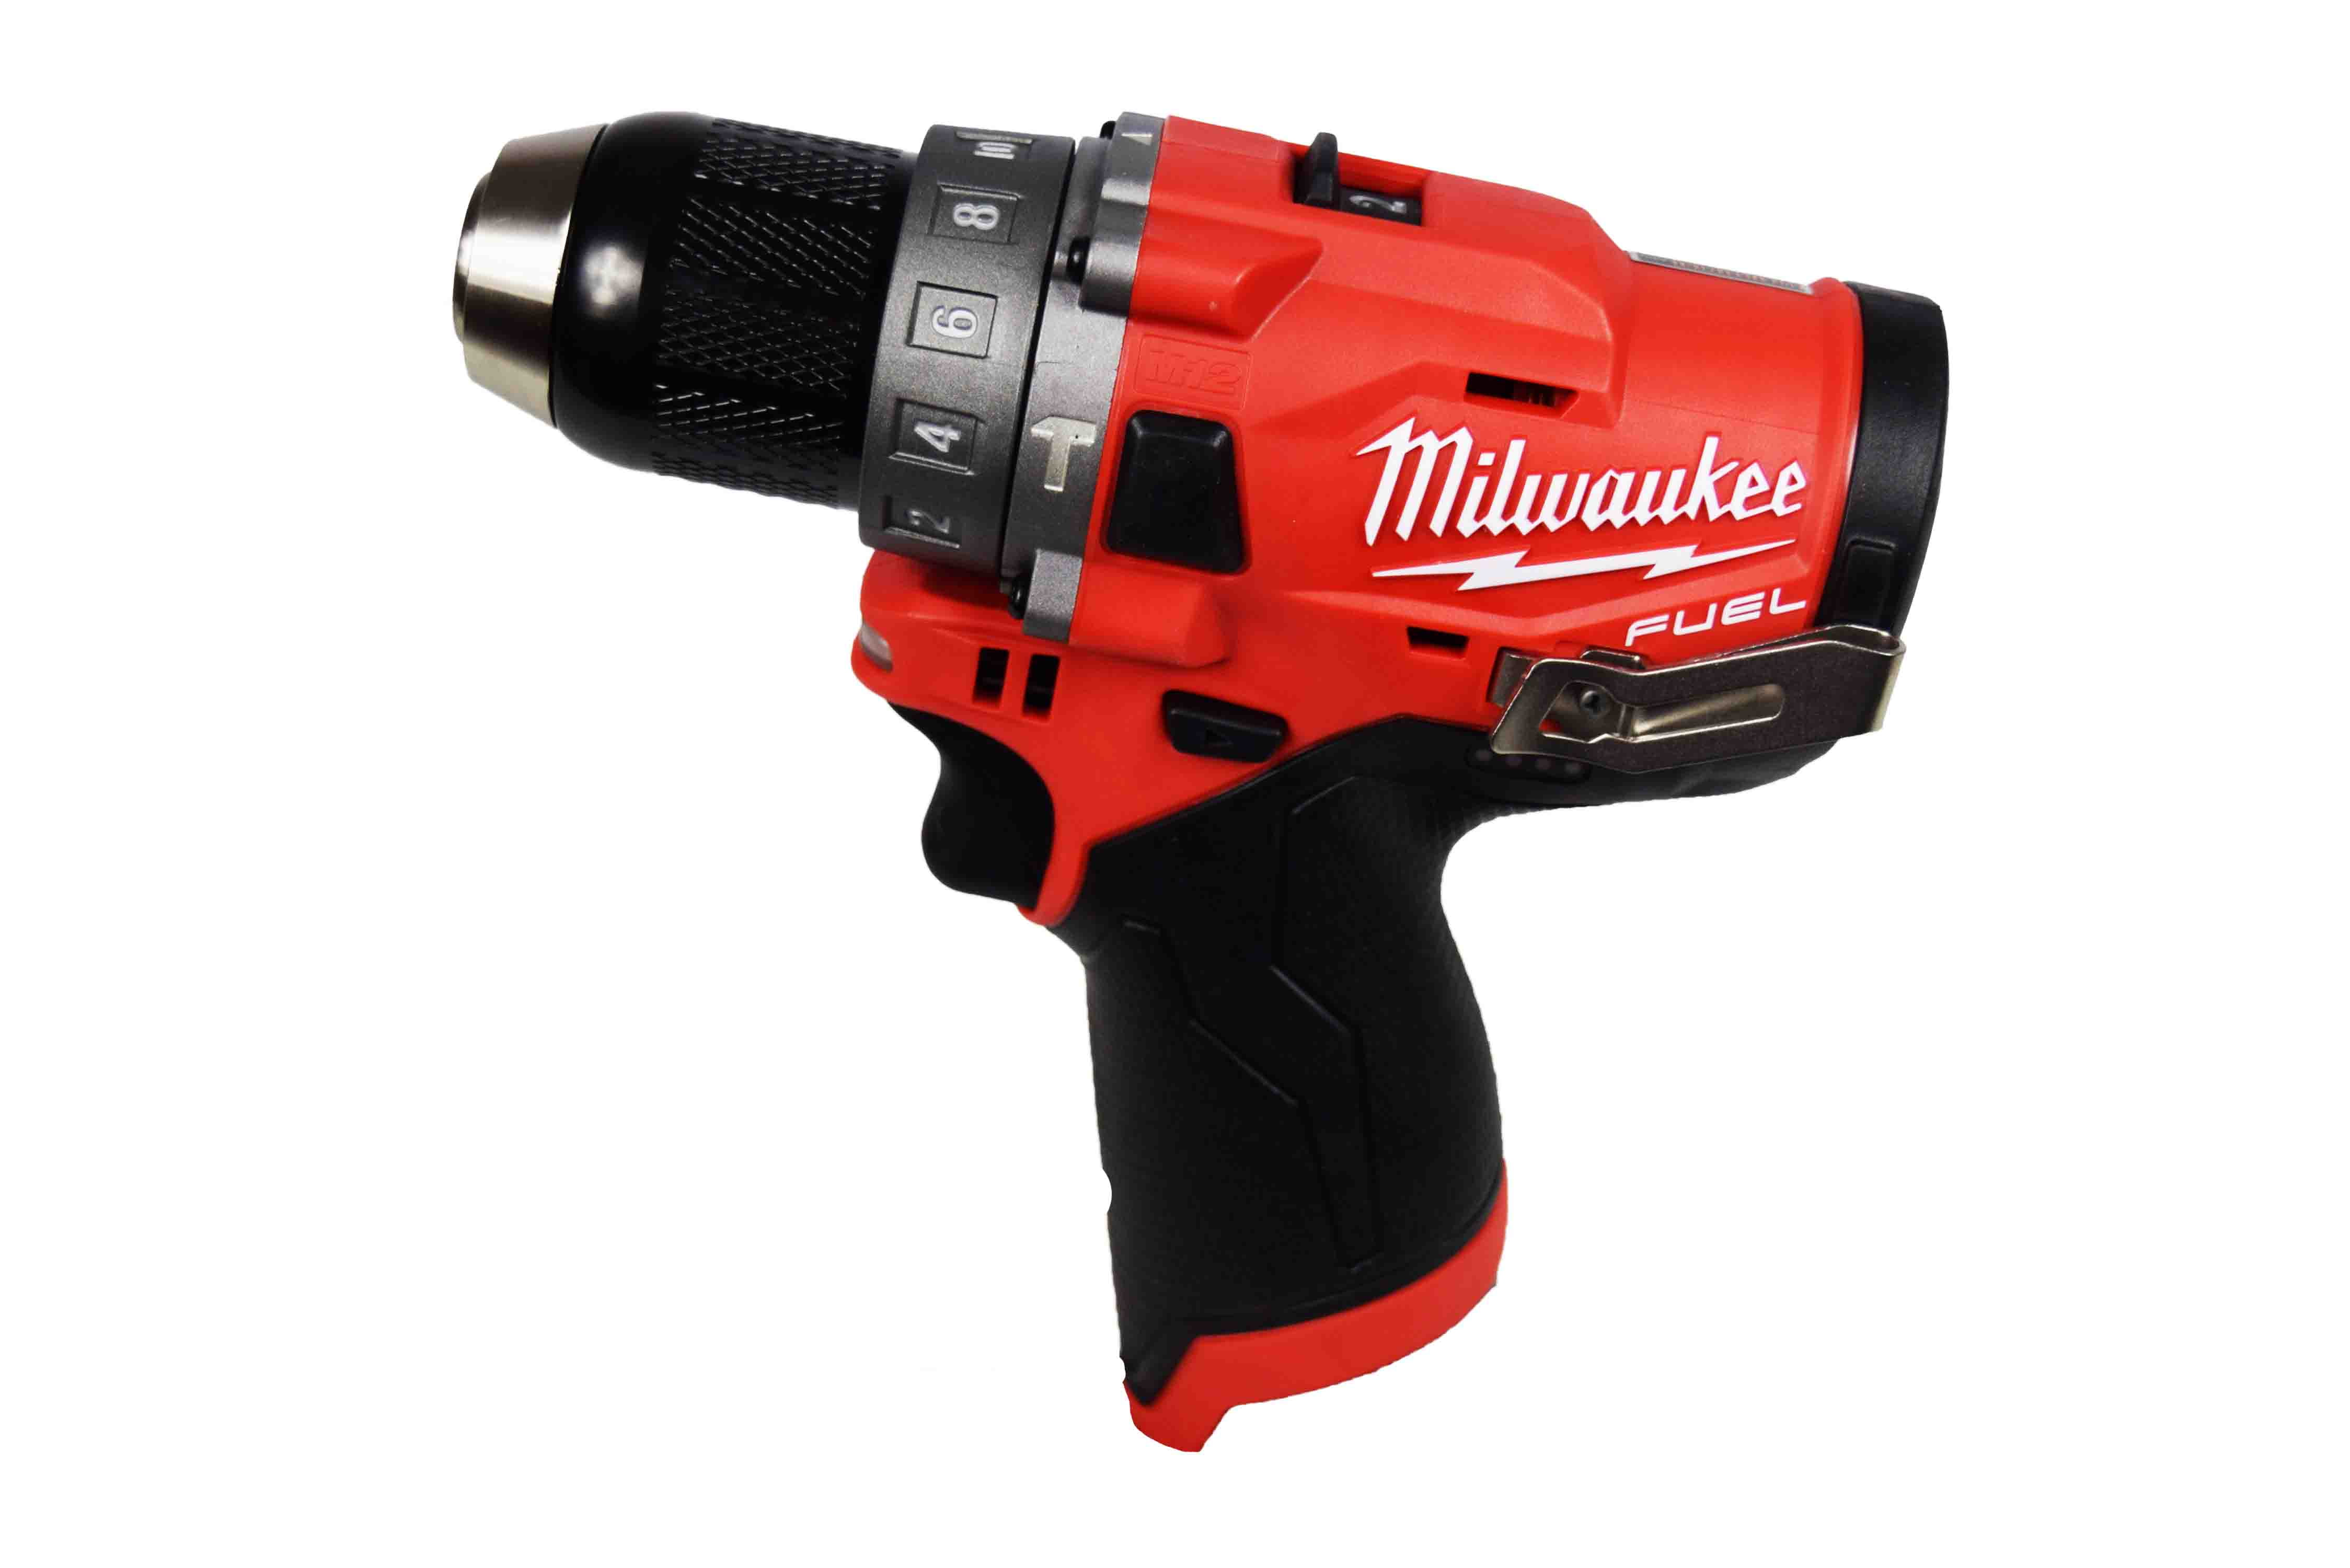 MILWAUKEE M12 FUEL Brushless Cordless 1/2 in 2504-20 BARE TOOL Hammer Drill 